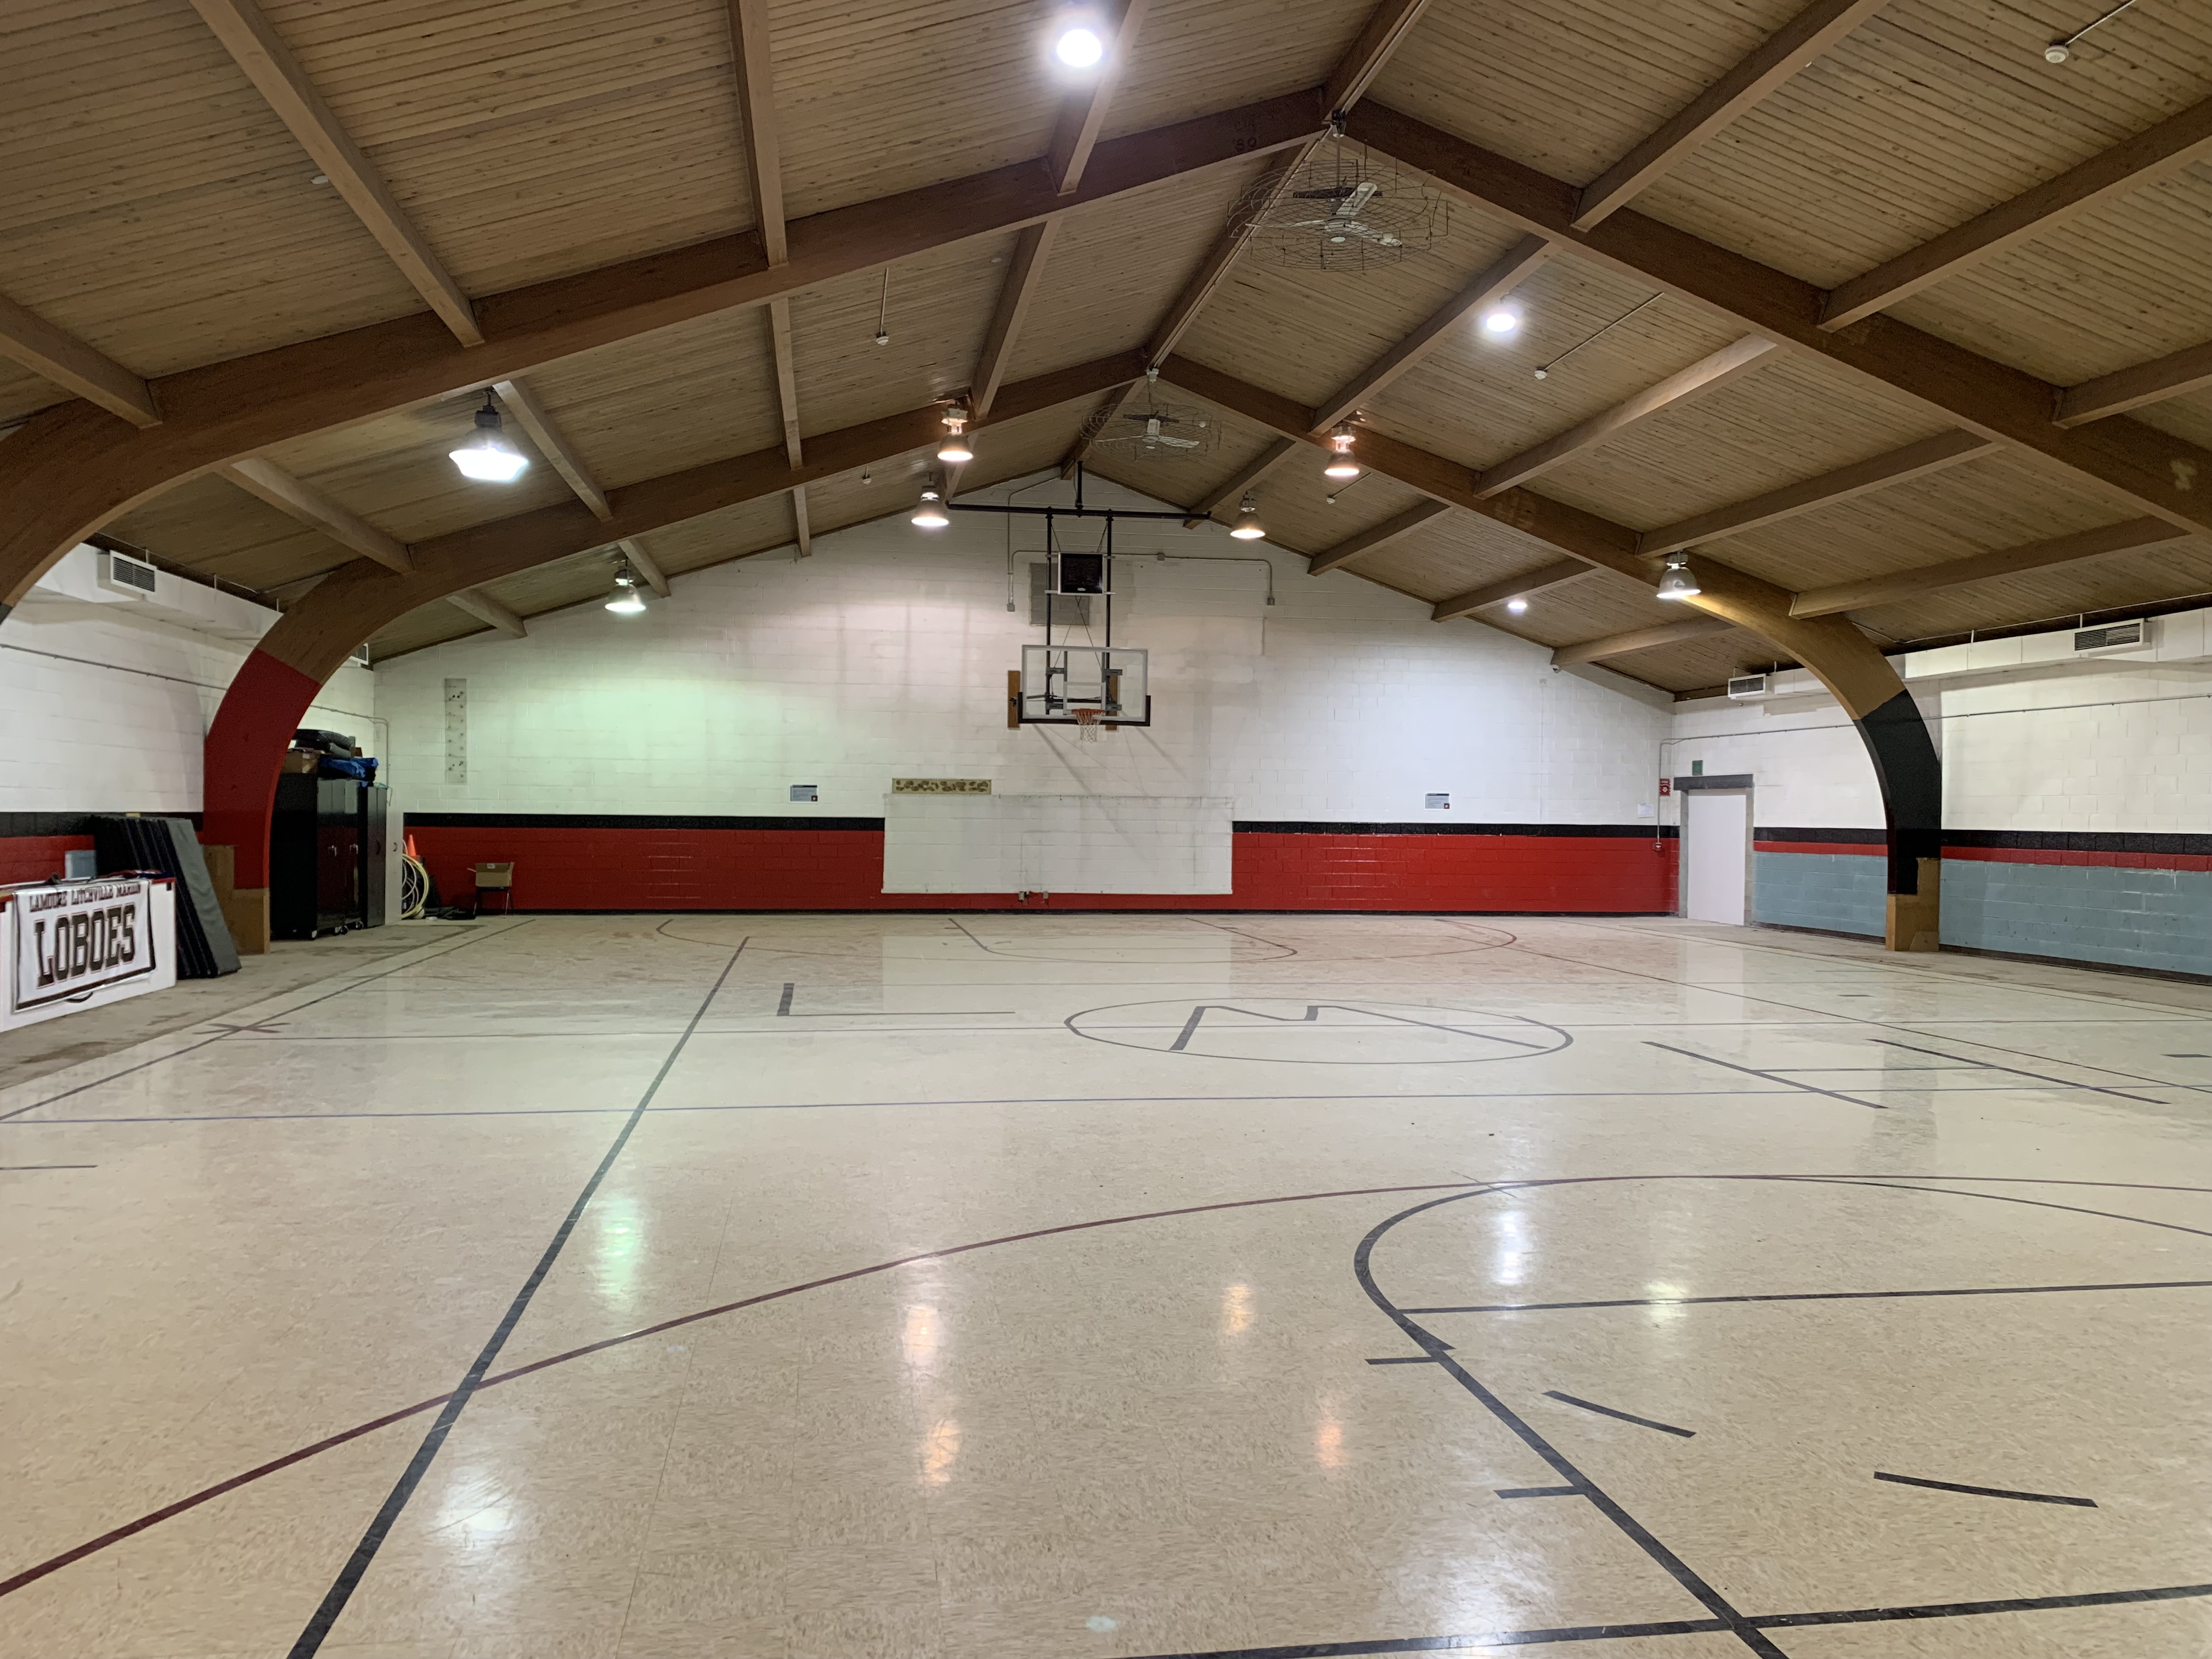 Image of the progress of the gym renovation